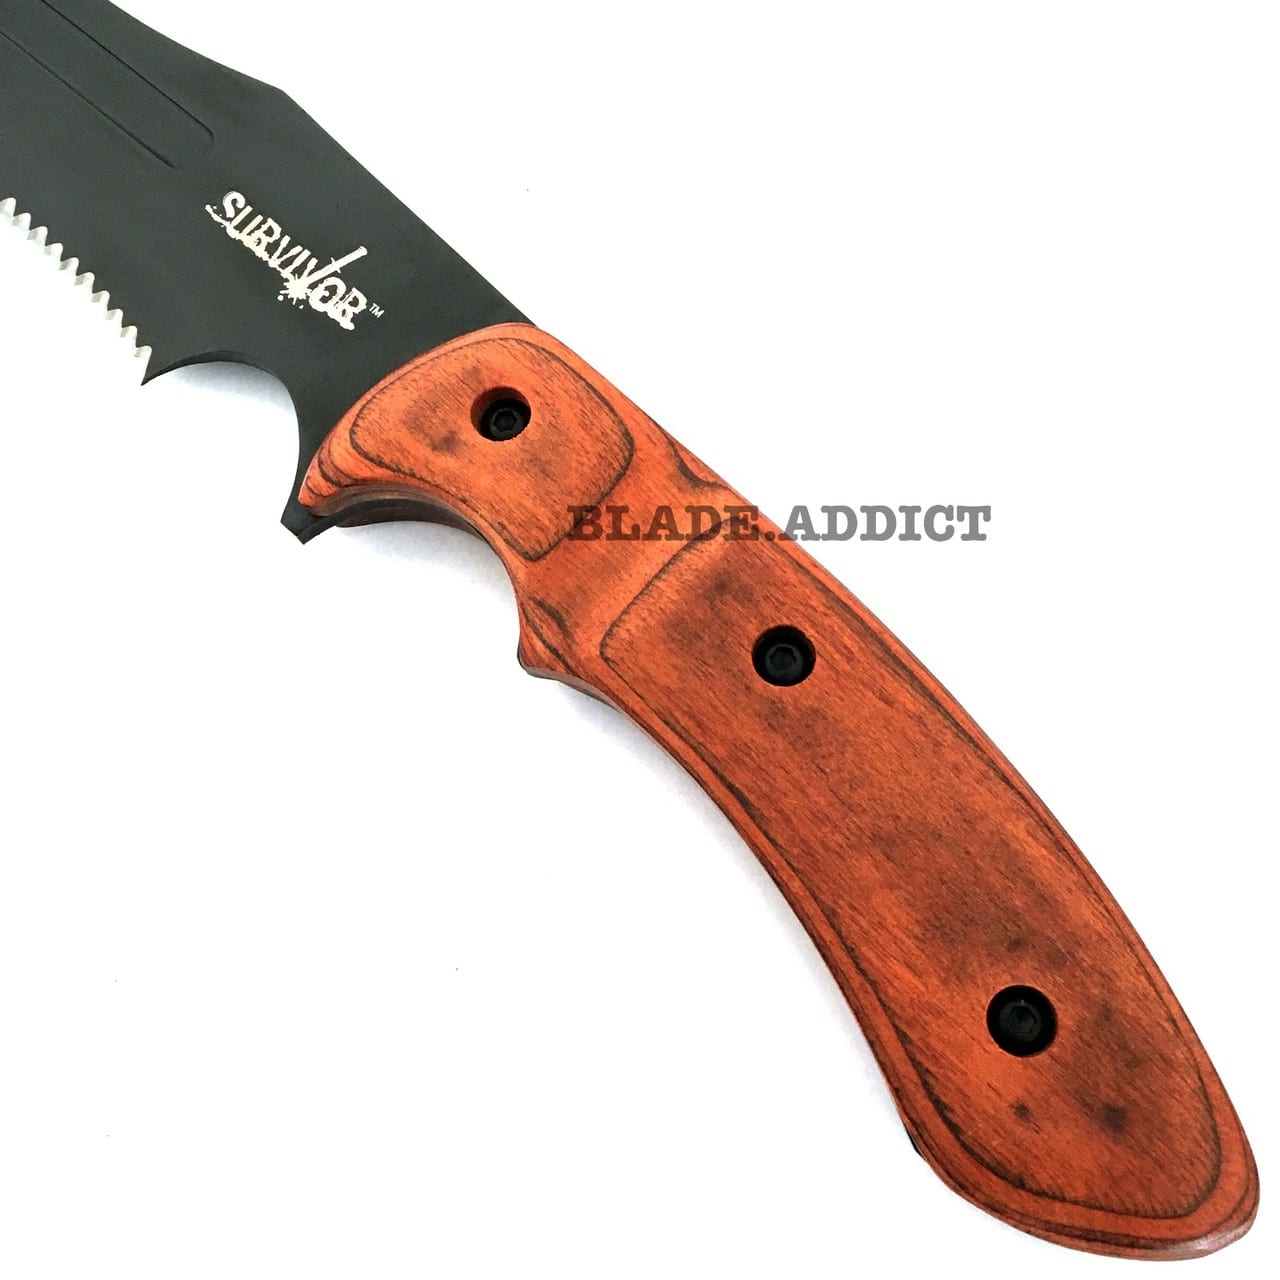 15" SURVIVAL HUNTING Full Tang FIXED BLADE KNIFE Machete Axe Scythe Wood Bowie